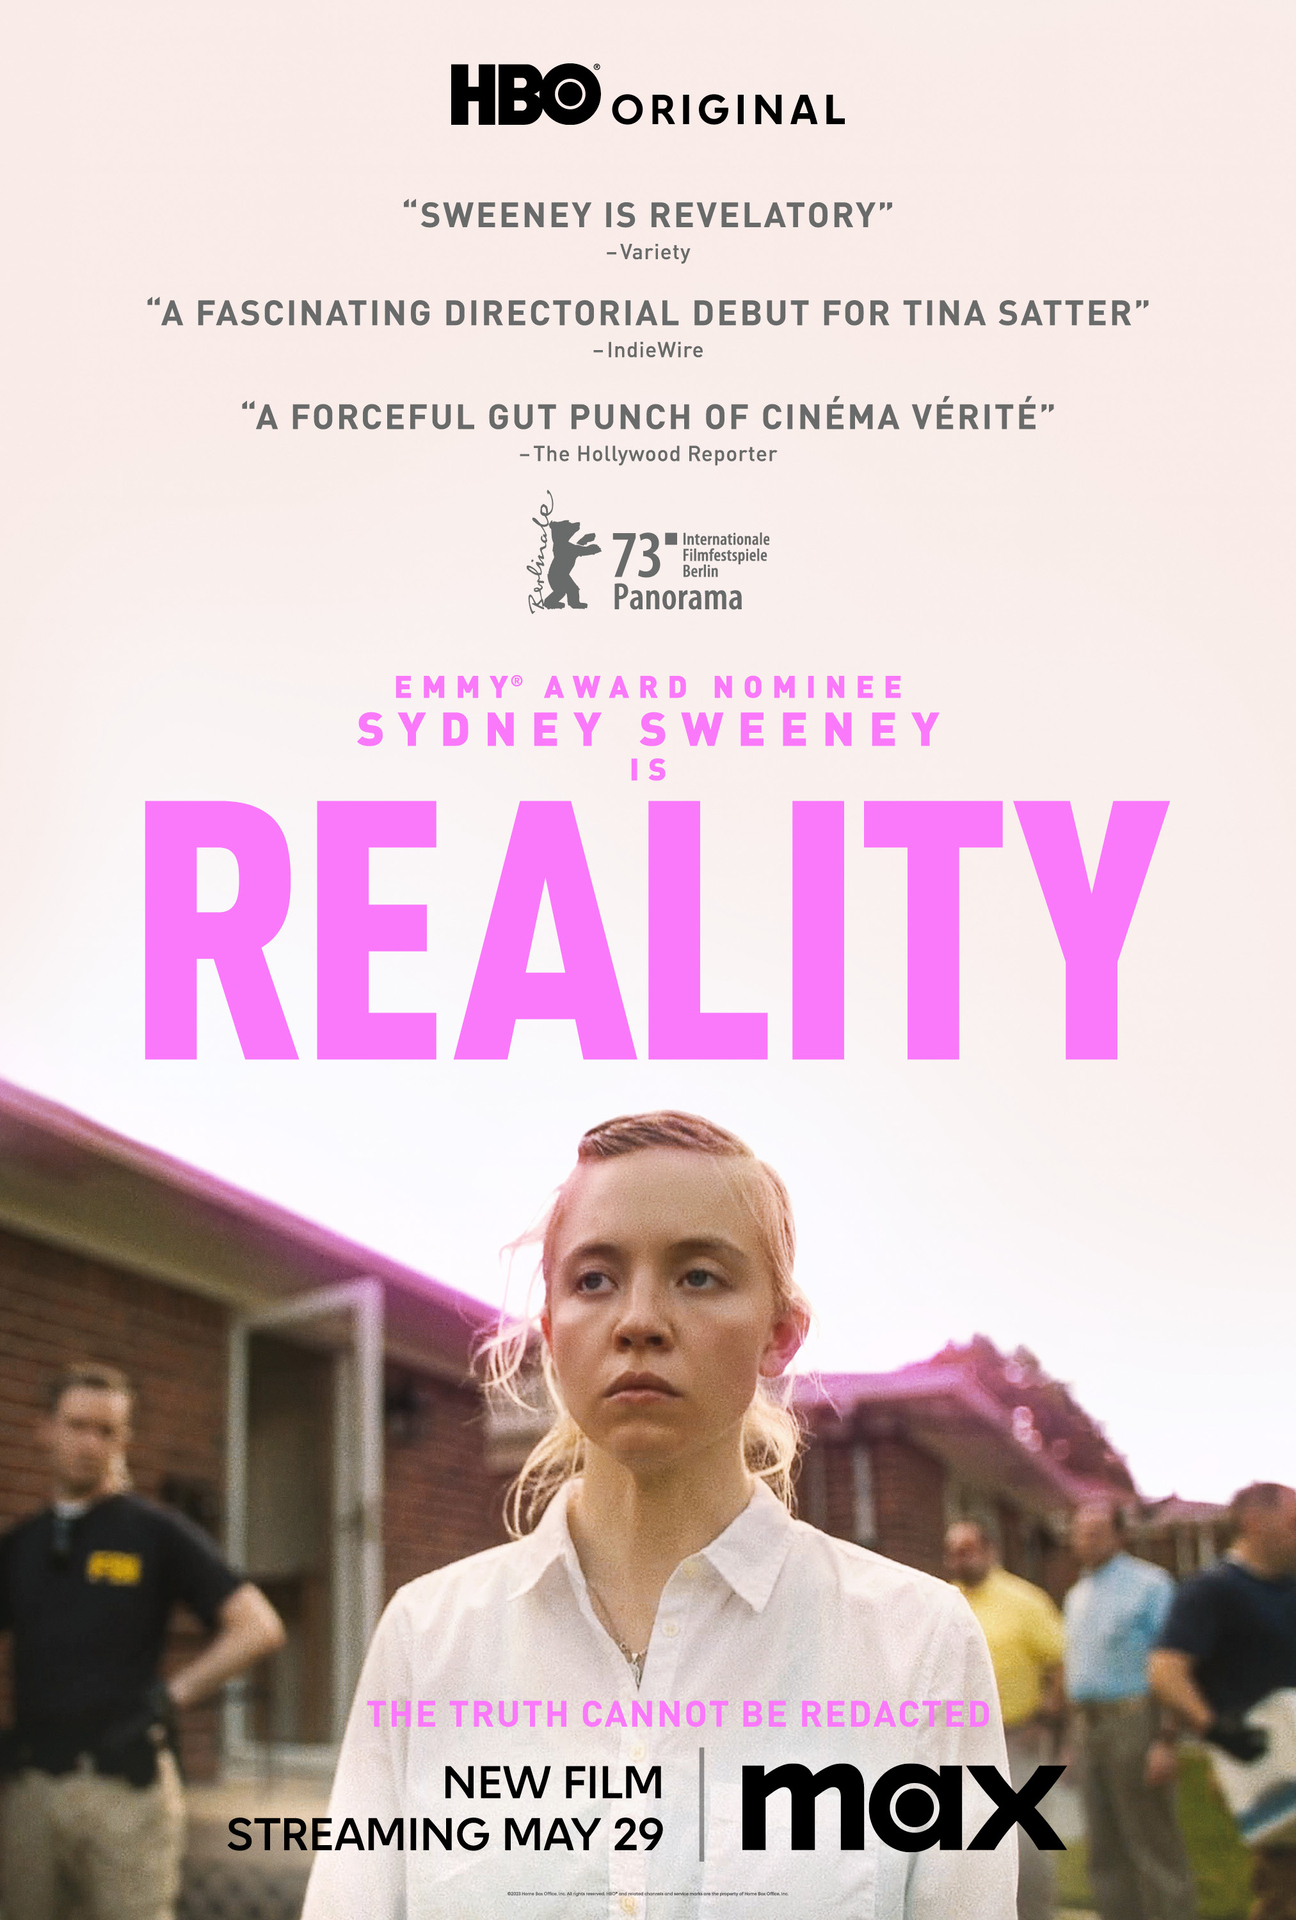 Sydney Sweeney in the official key art for Tina Satter's HBO drama film, Reality